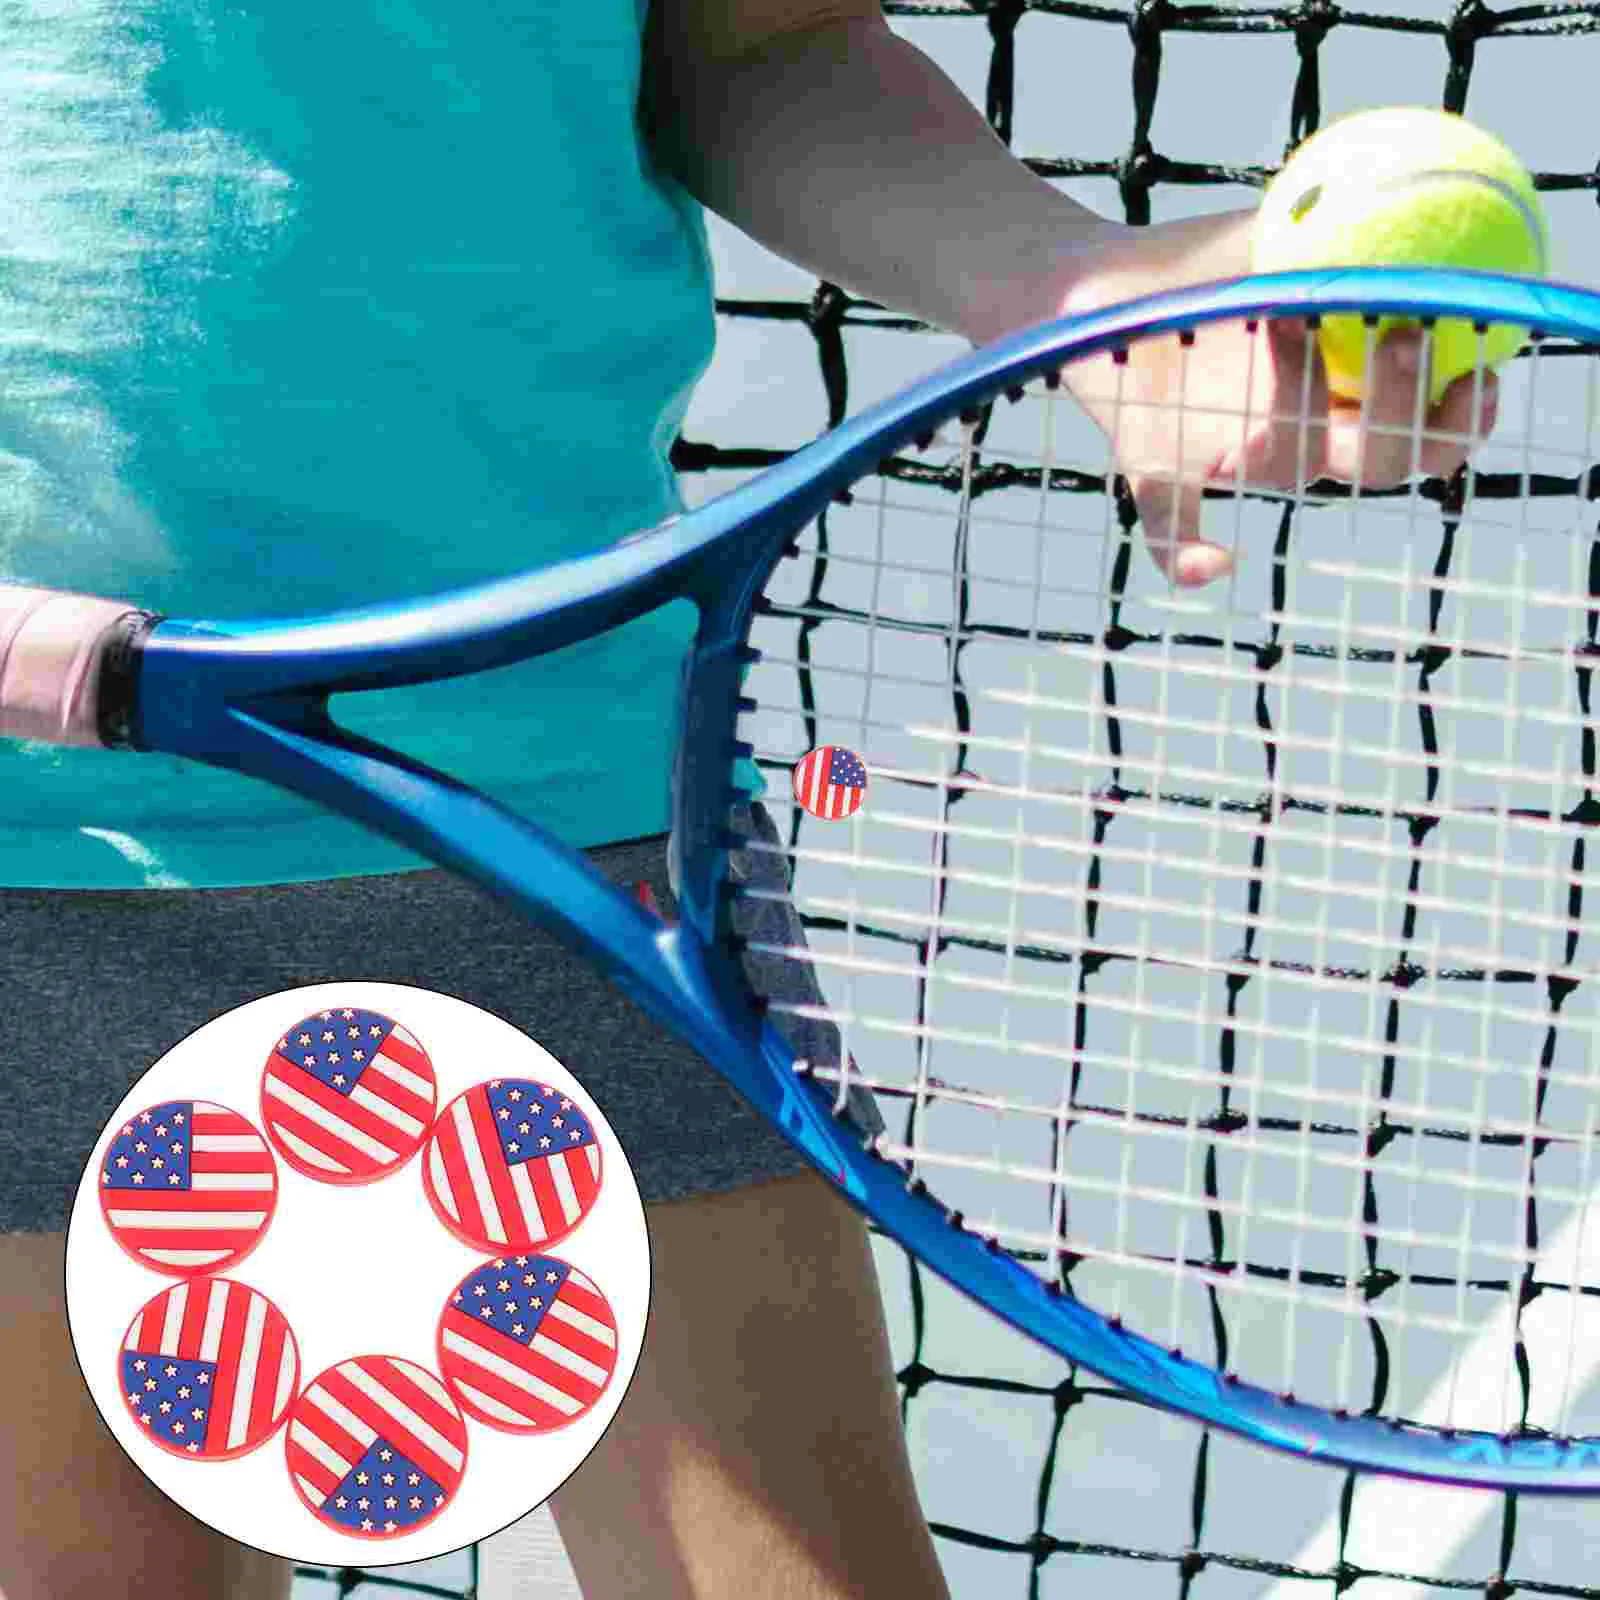 

6PCS Silicone Tennis Racket Vibration Dampeners American Flag Tennis Racquet Absorbers Tennis Racket Strings Dampers for Players